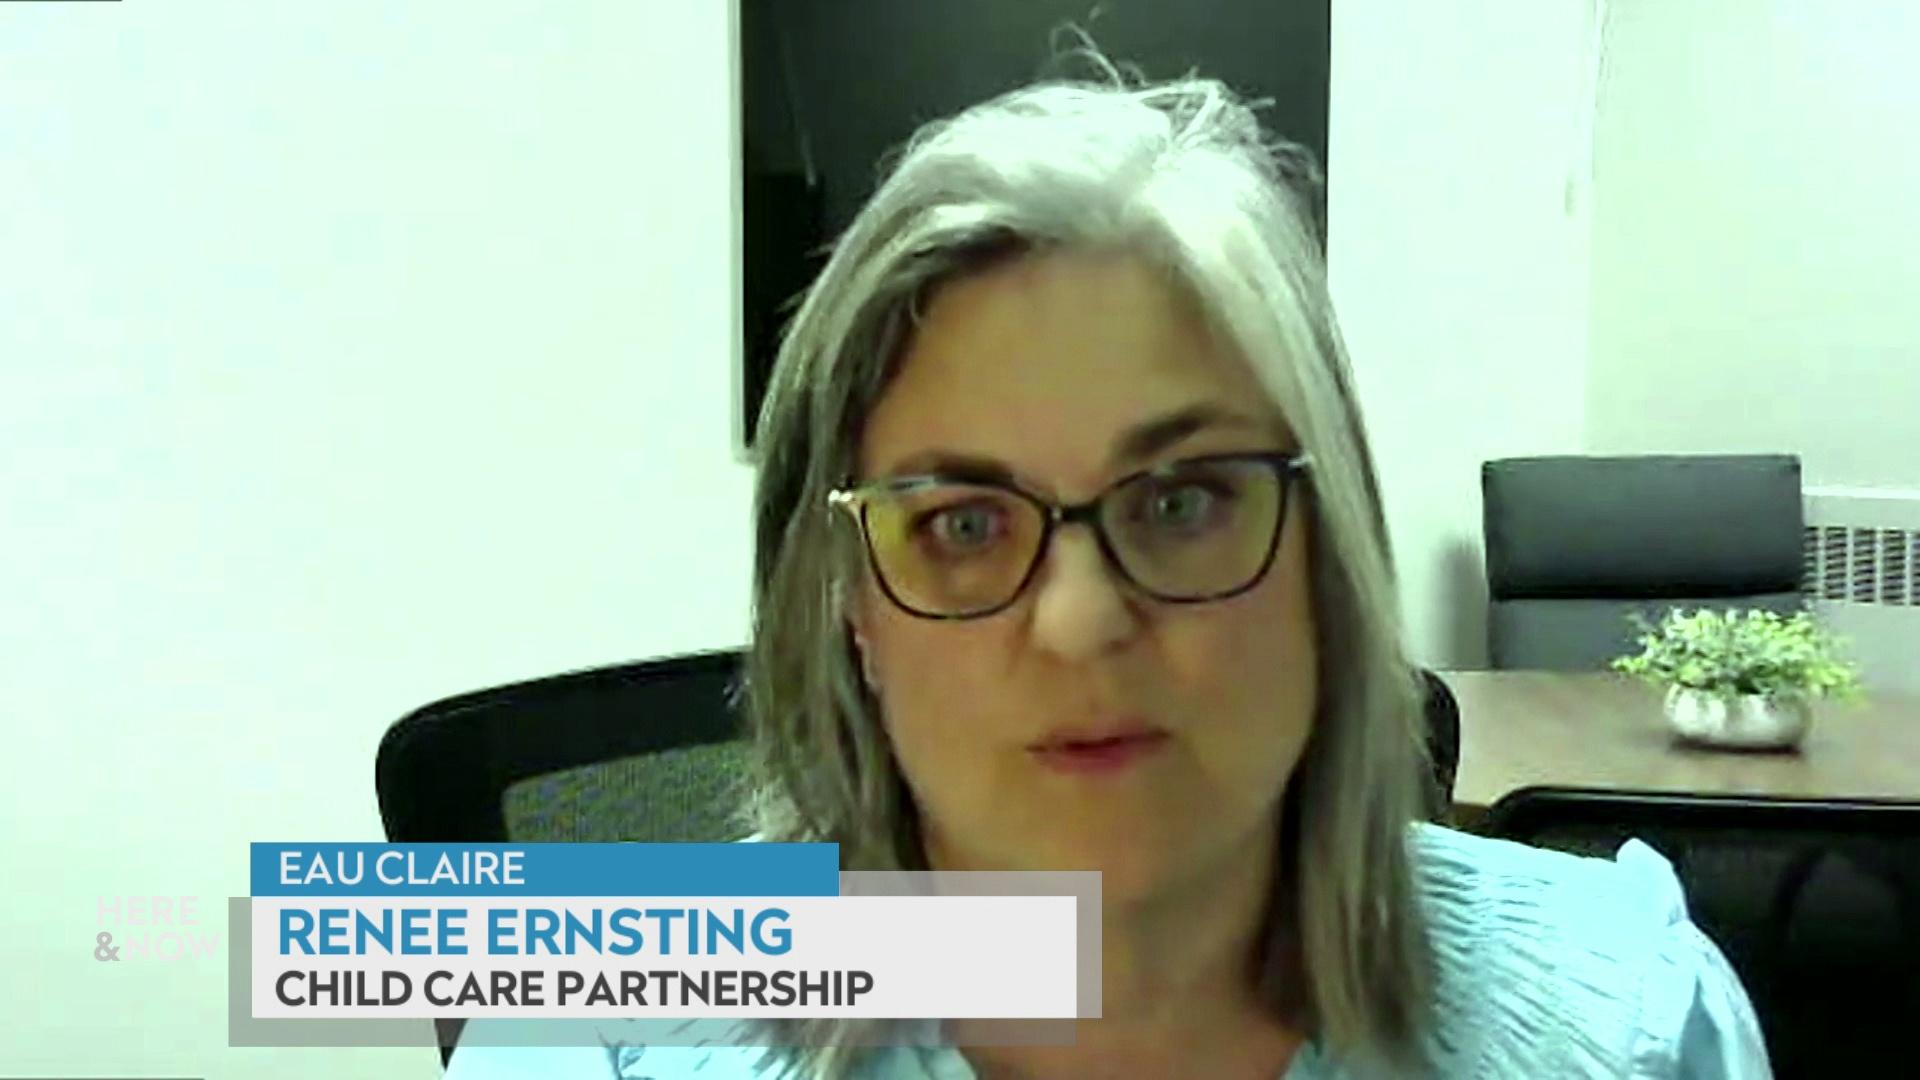 A still image from a video shows Renee Ernsting in front of a table and TV with a graphic at bottom reading 'Eau Claire,' 'Renee Ernsting' and 'Child Care Partnership.'